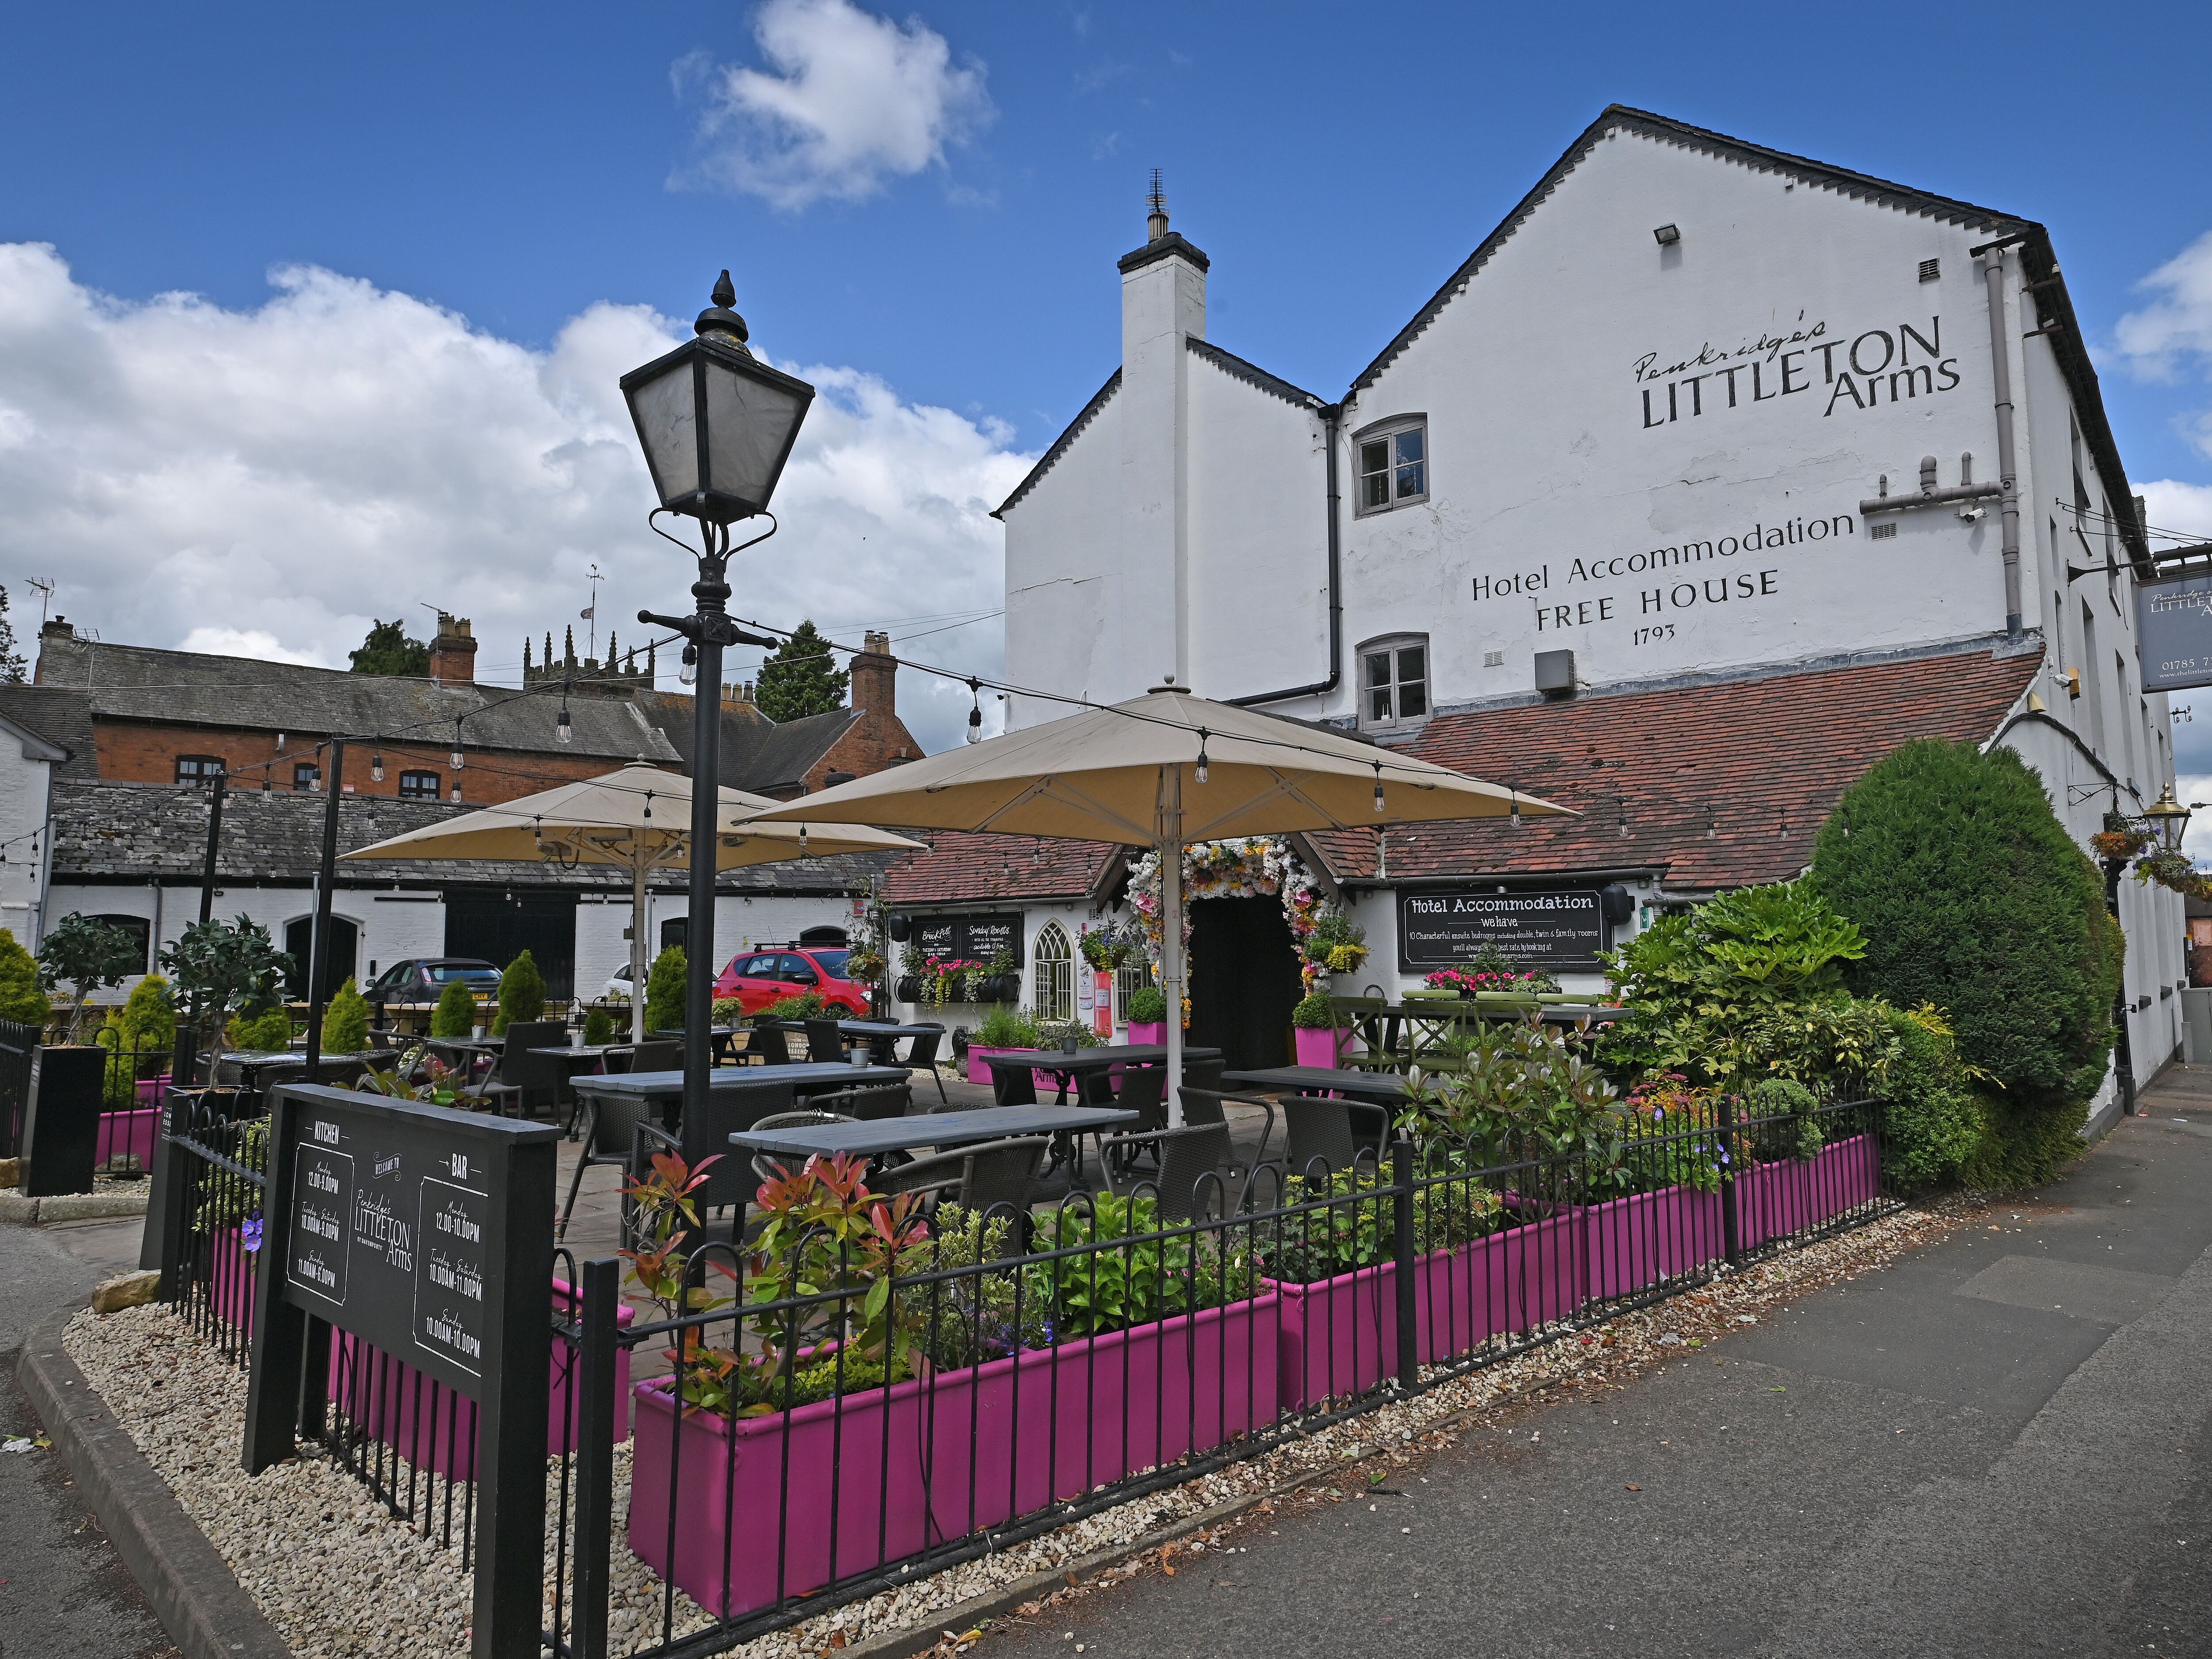 Pub at the heart of Staffordshire launches new summer menu